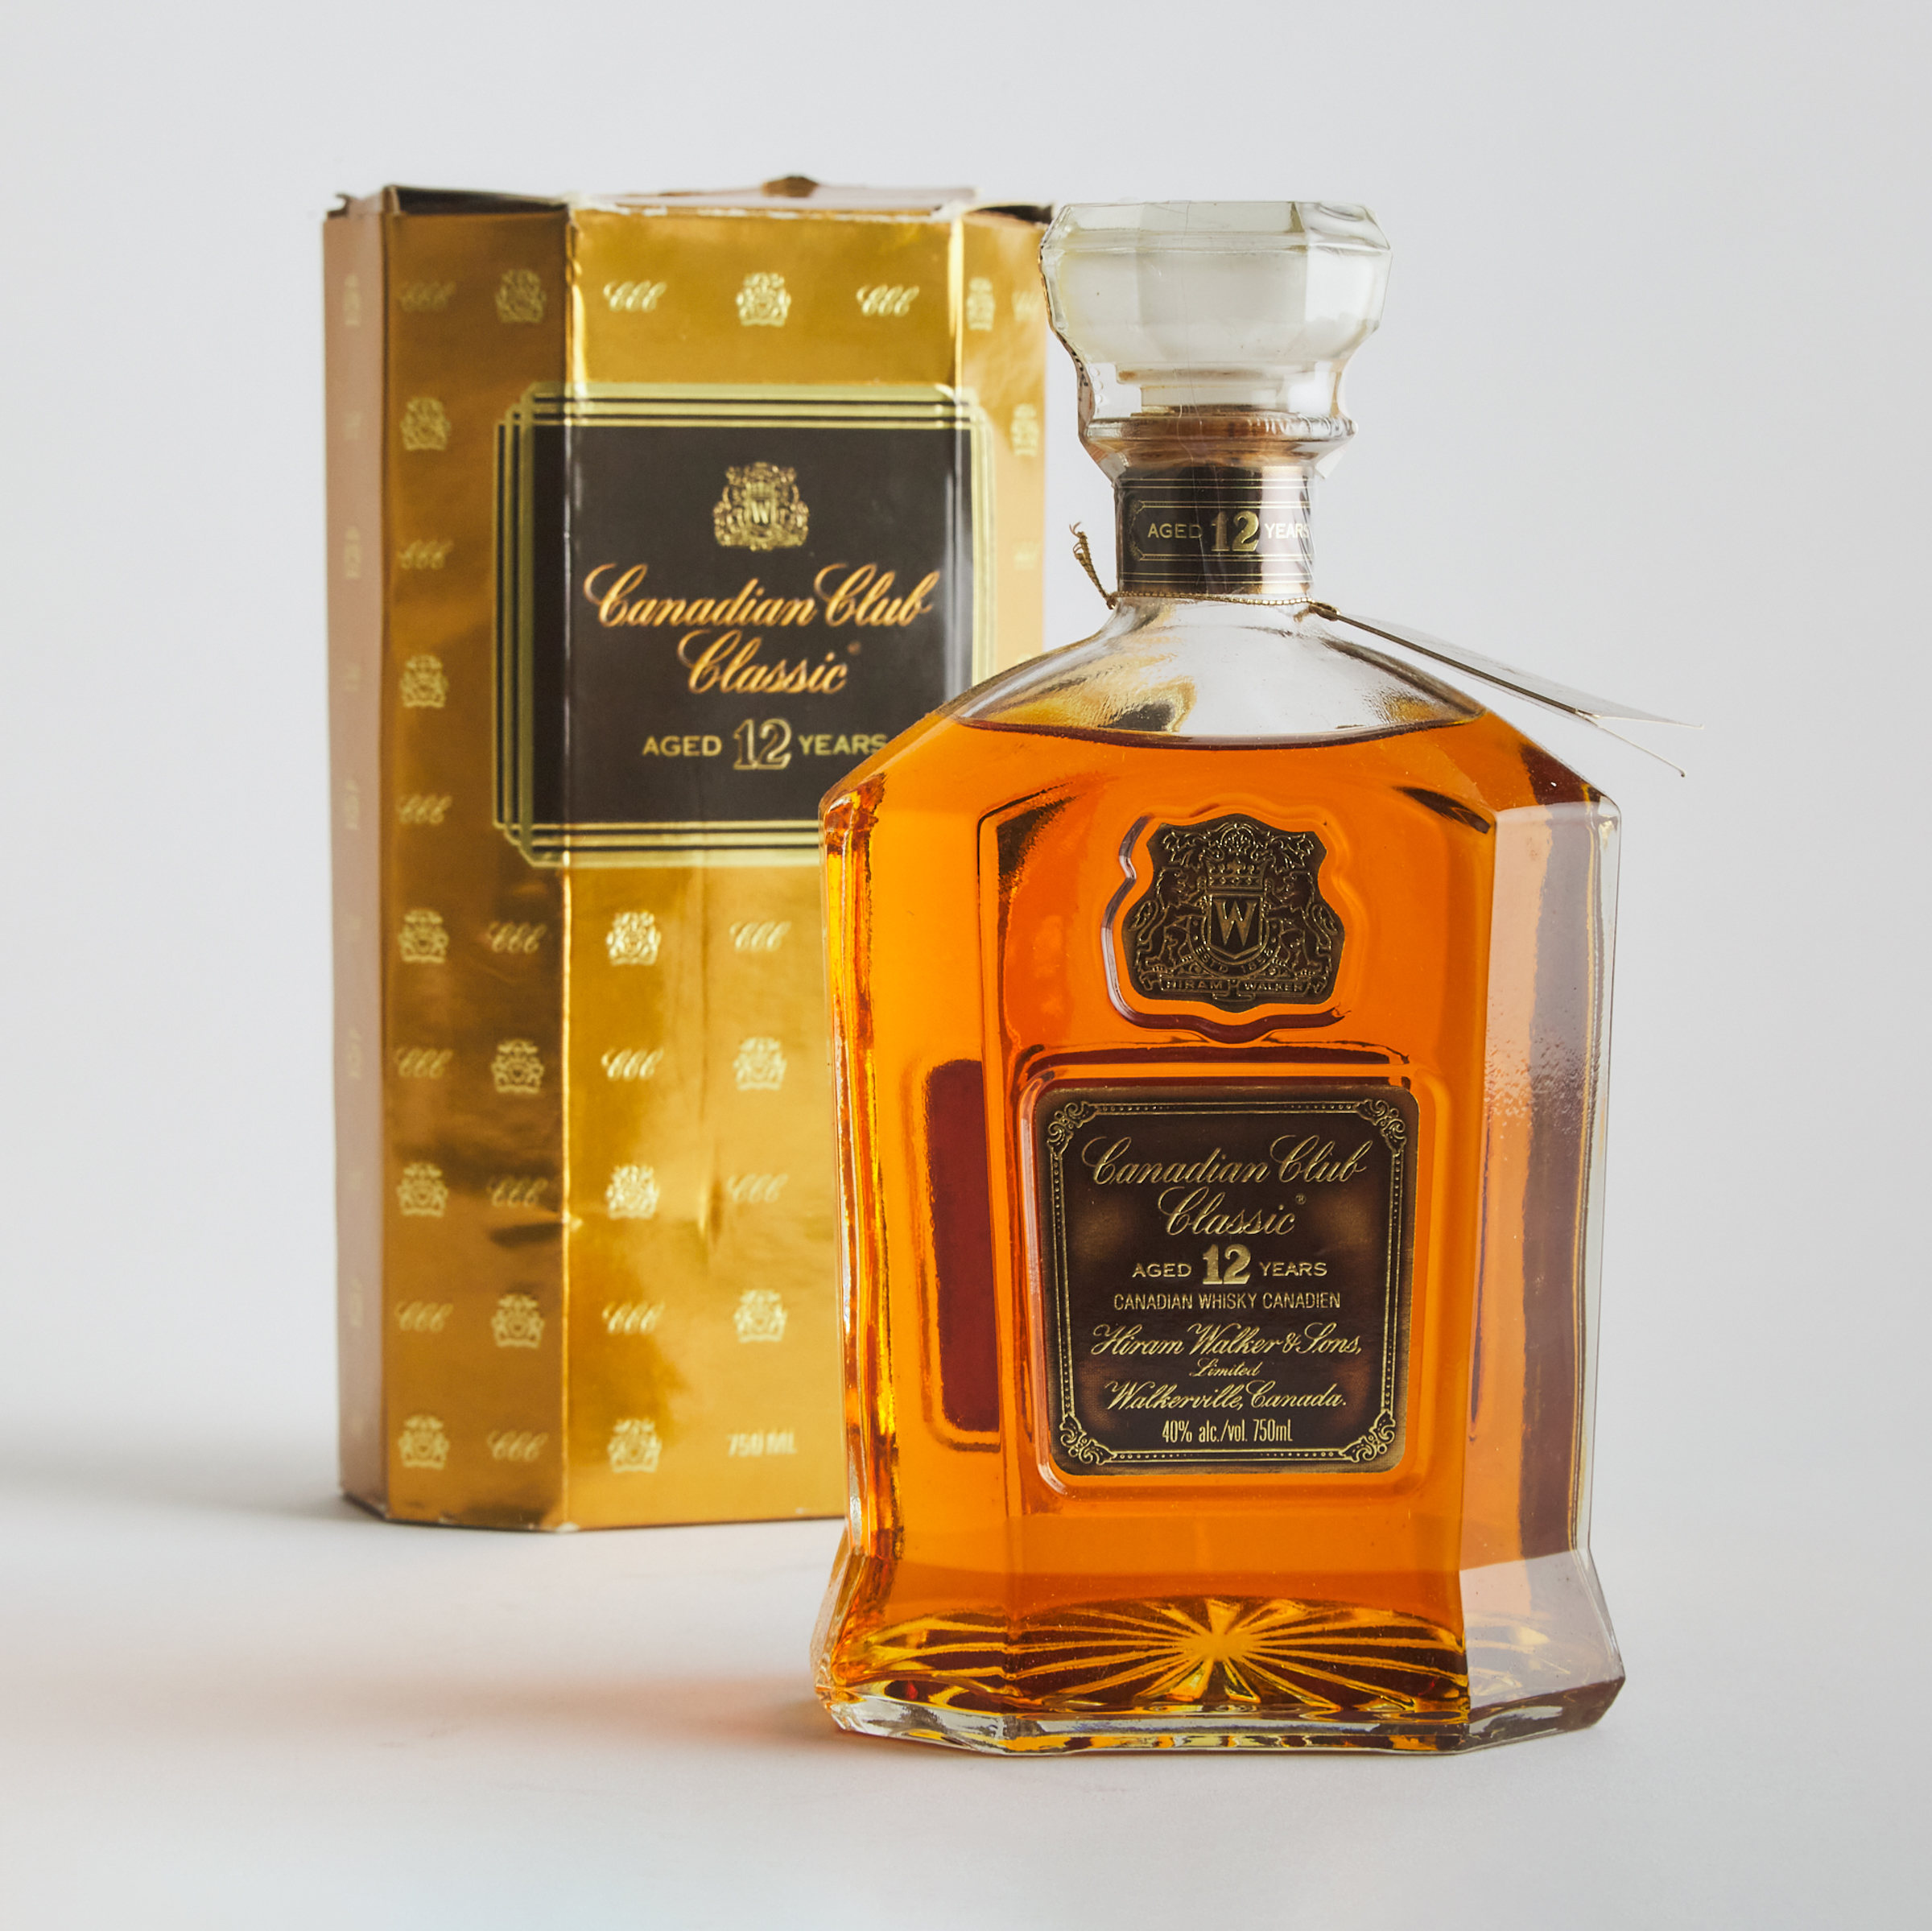 CANADIAN CLUB CLASSIC CANADIAN WHISKY 12 YEARS (ONE 750 ML)